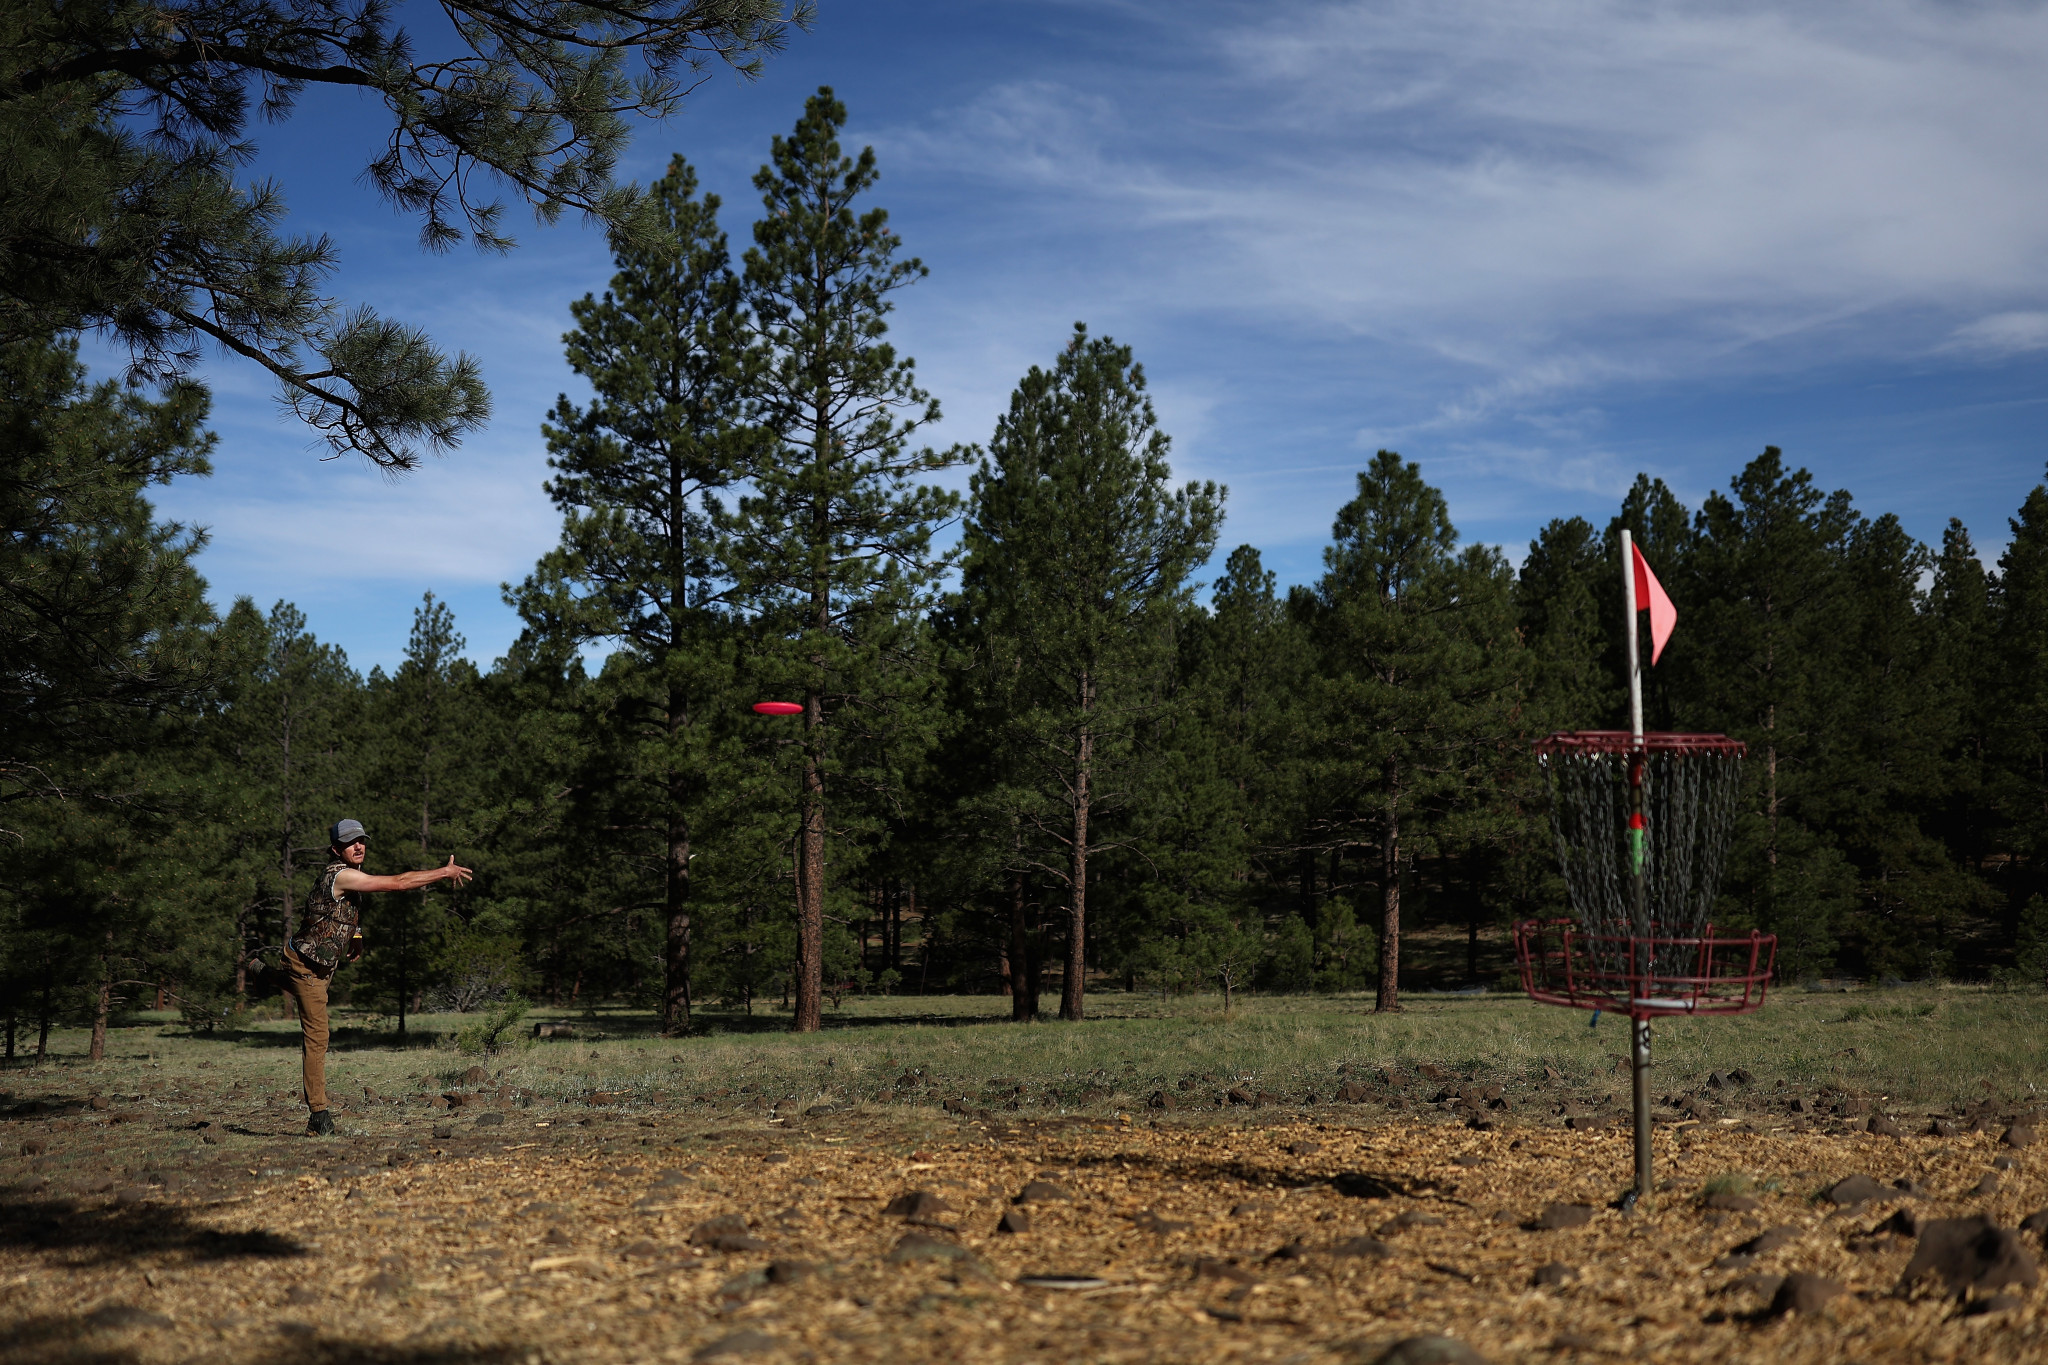 Disc golf broke the trend and grew its participation numbers following the outbreak of the COVID-19 pandemic ©Getty Images